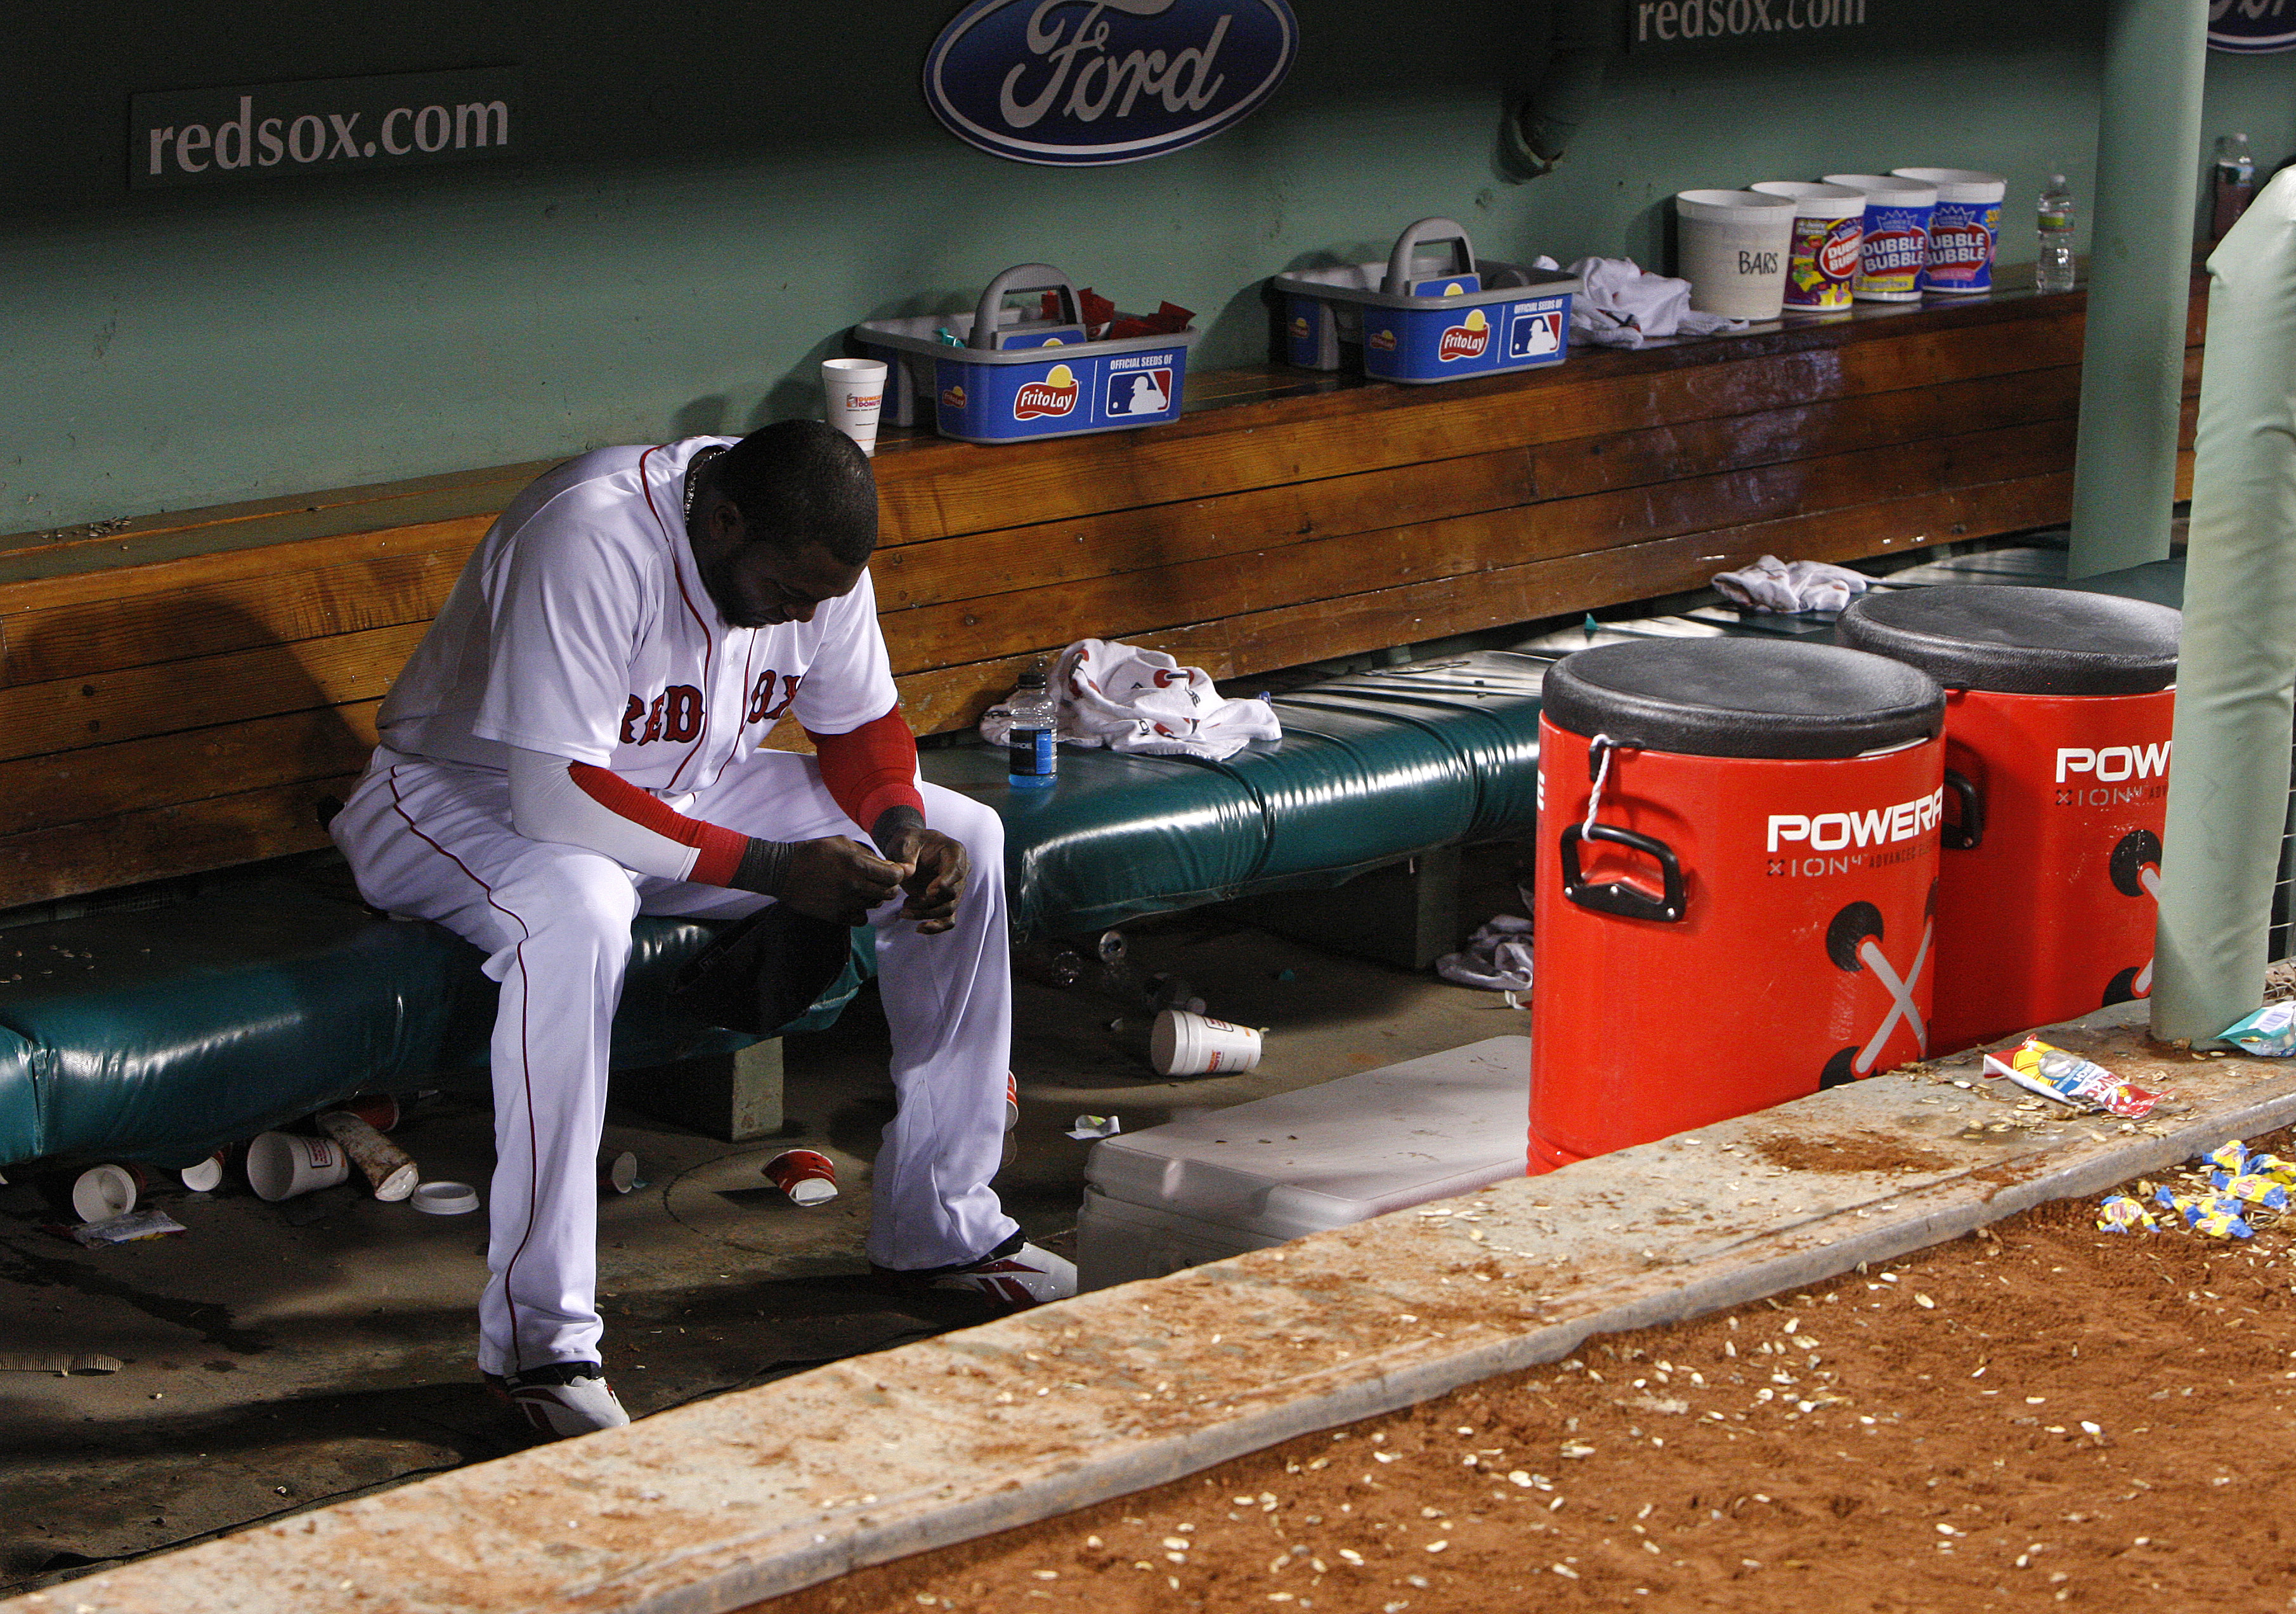 The Red Sox collapsed in September 2011, having entered the month with a nine-game lead and ending it out of the playoffs. Ortiz was dejected in the dugout after a Sept. 21, 2011, a 6-4 loss to the Orioles.